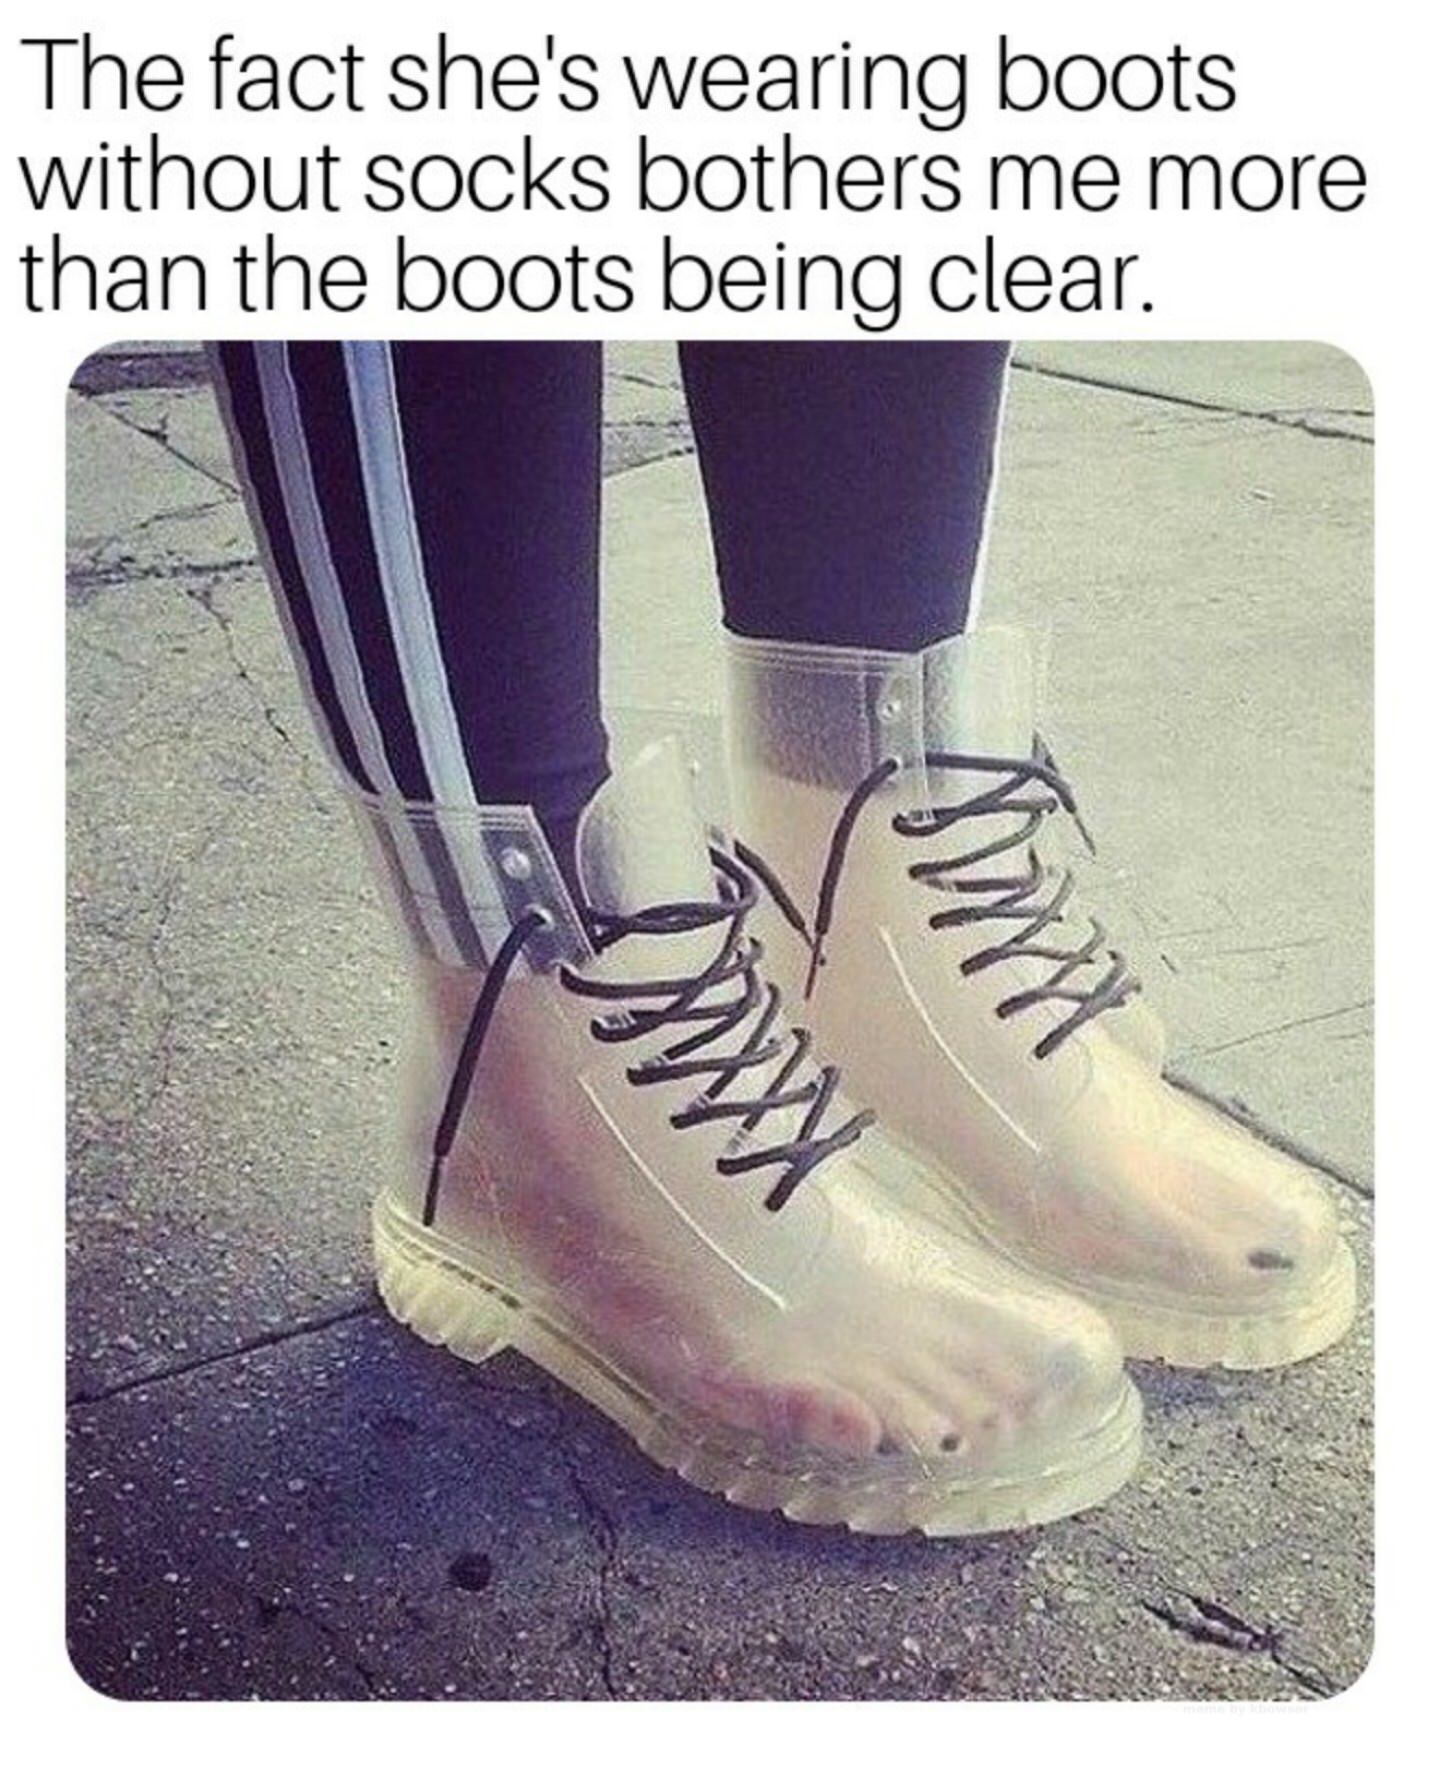 wearing boots meme - The fact she's wearing boots without socks bothers me more than the boots being clear.